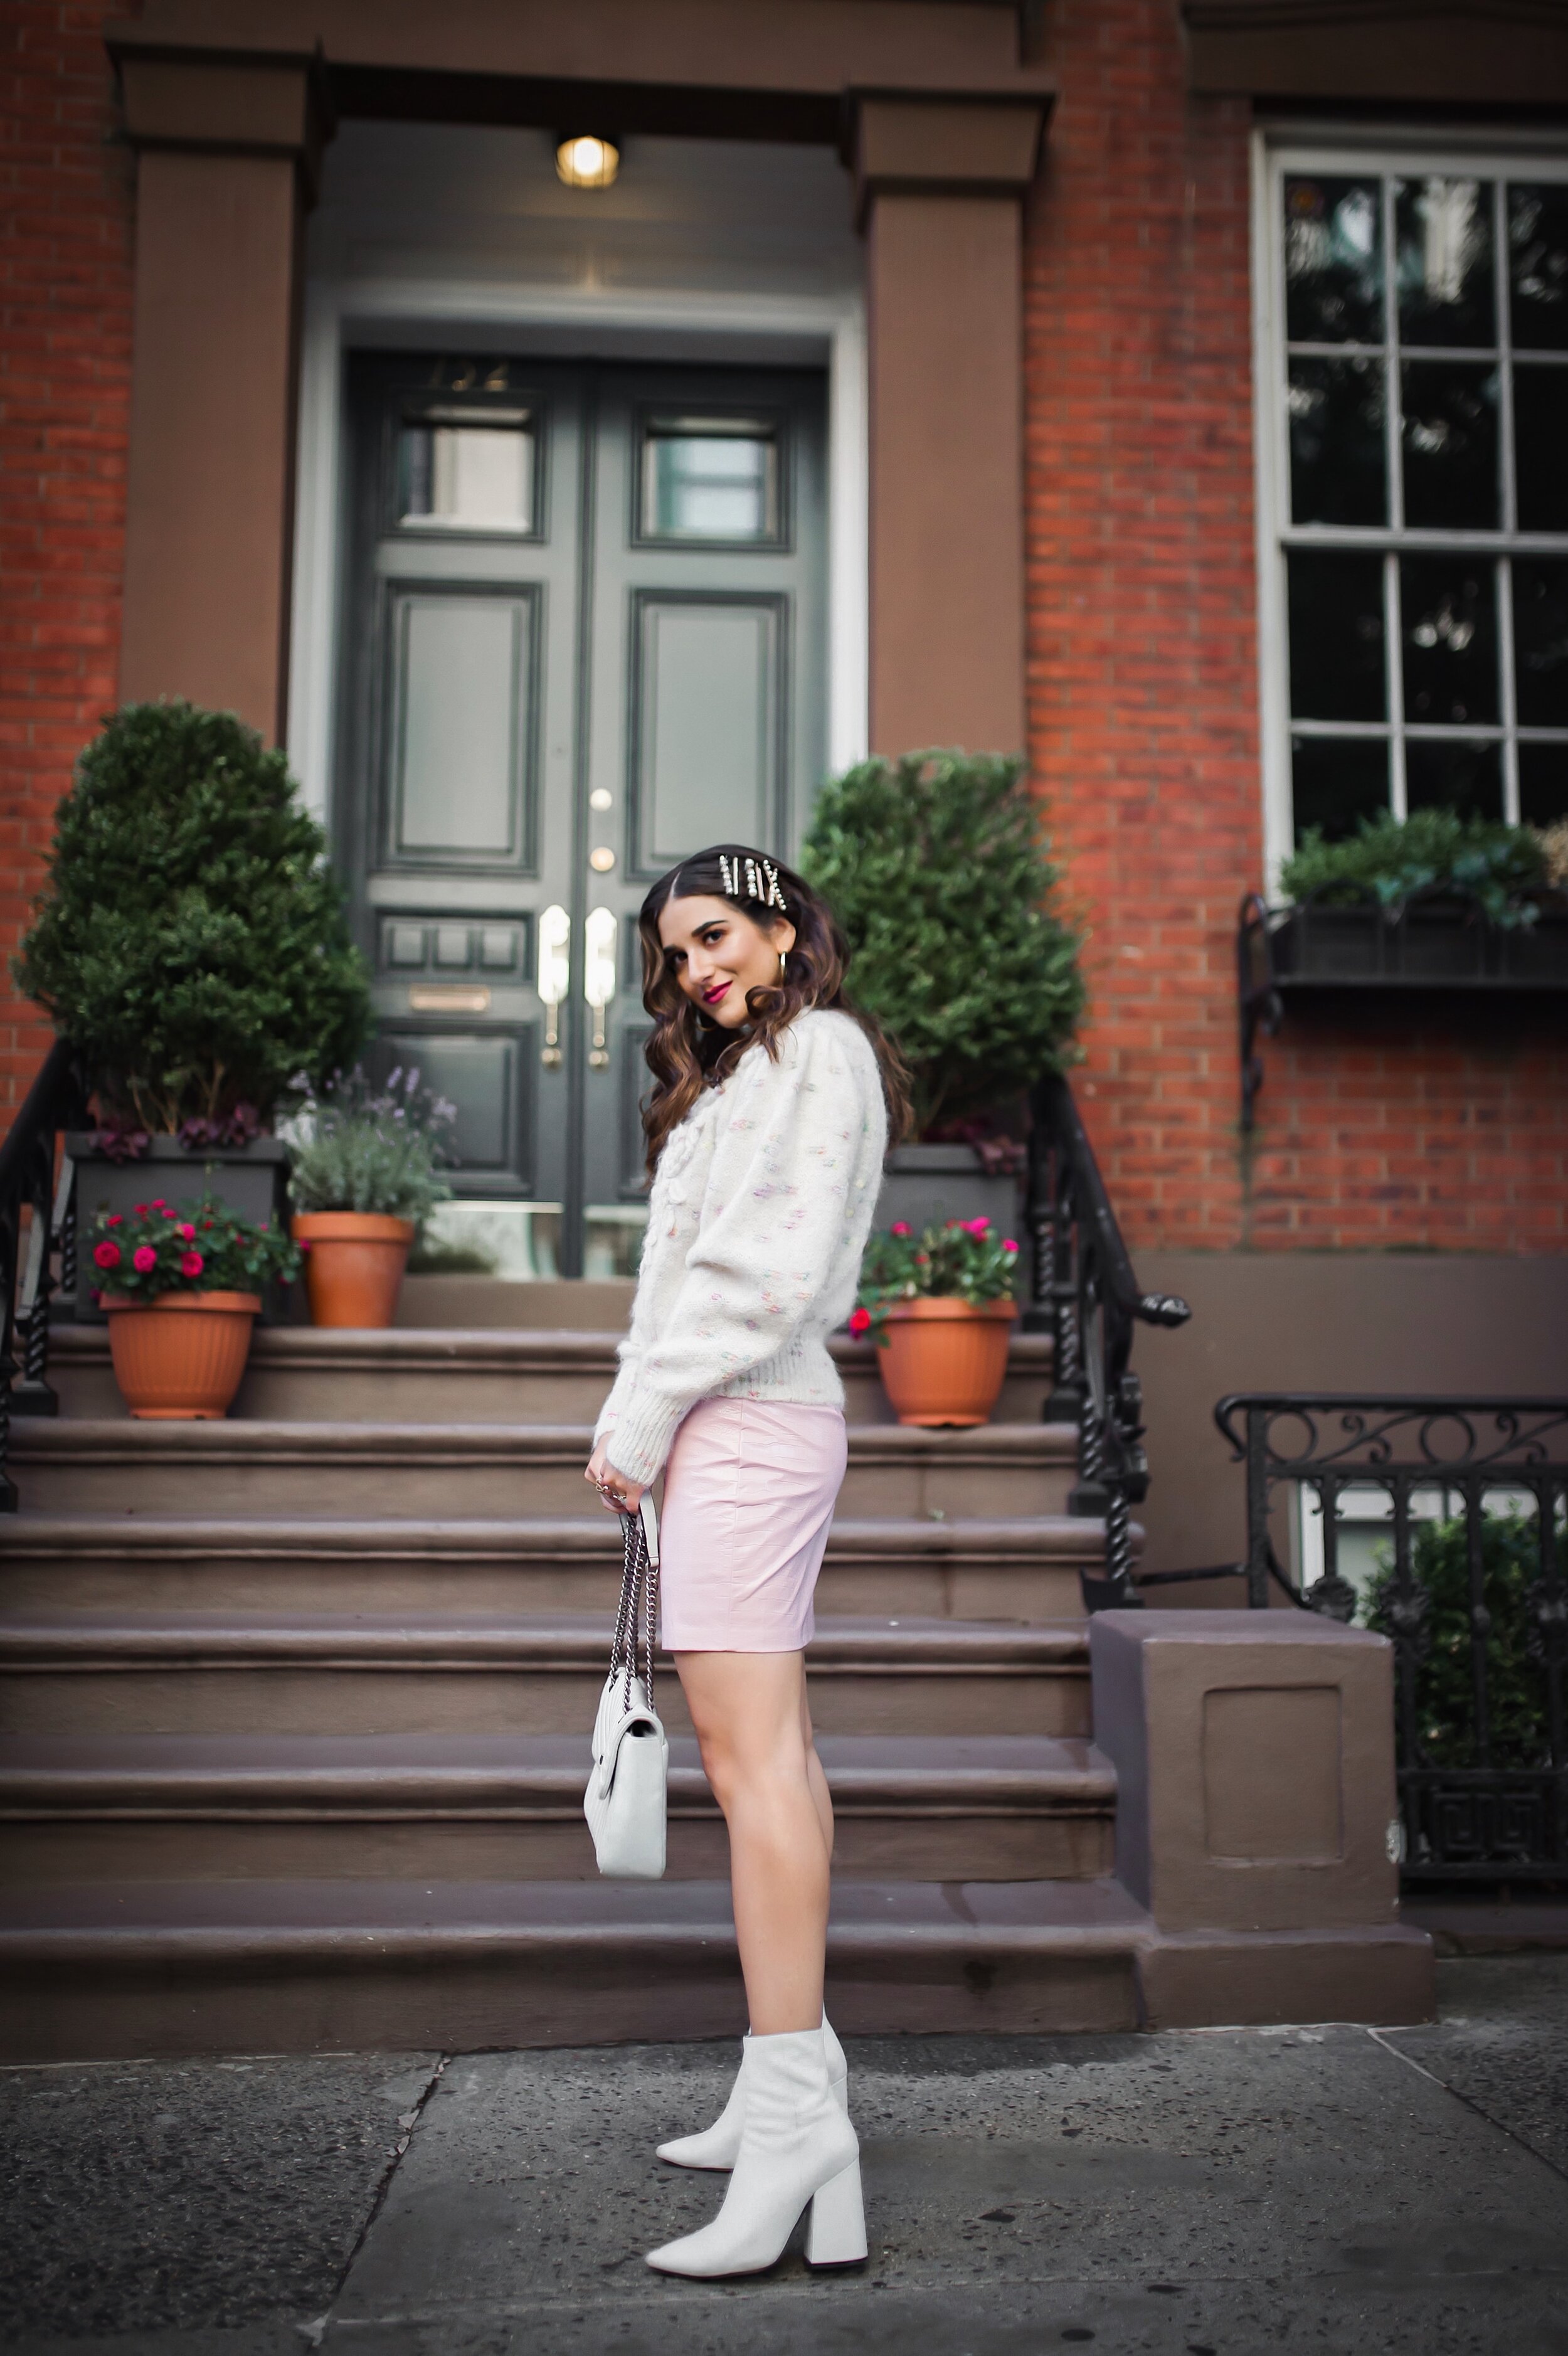 We Always Adapt Floral Embroidered Cream Sweater Pink Zipper Skirt Esther Santer Fashion Blog NYC Street Style Blogger Outfit OOTD Trendy Shopping Girl What How To Wear West Village Photoshoot Inspo Ideas Fall Winter Accessories Pins Clips Gold Hoops.JPG